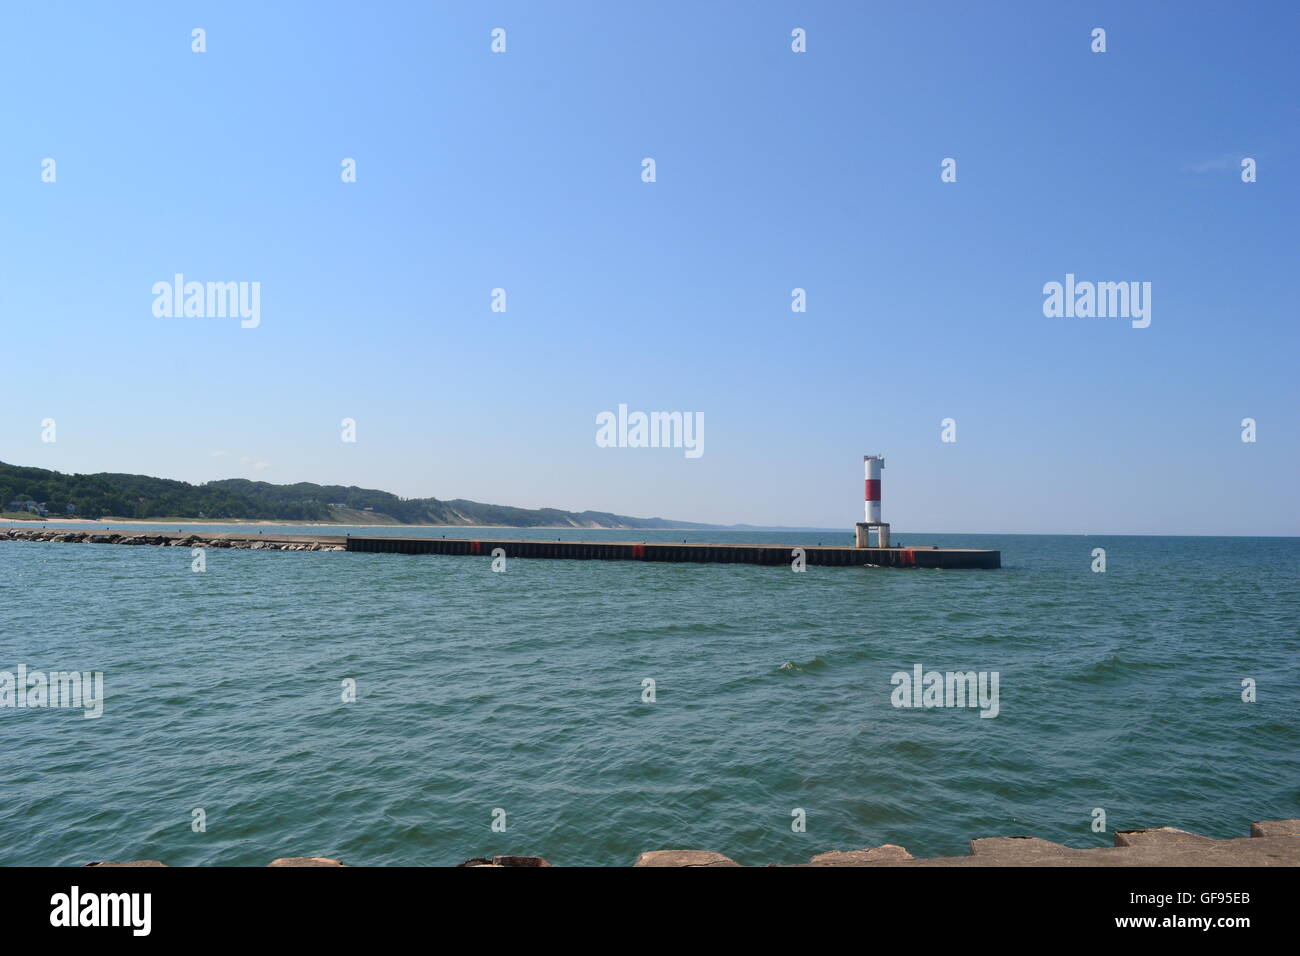 Pier on Lake Michigan, blue water and blue sky. Stock Photo